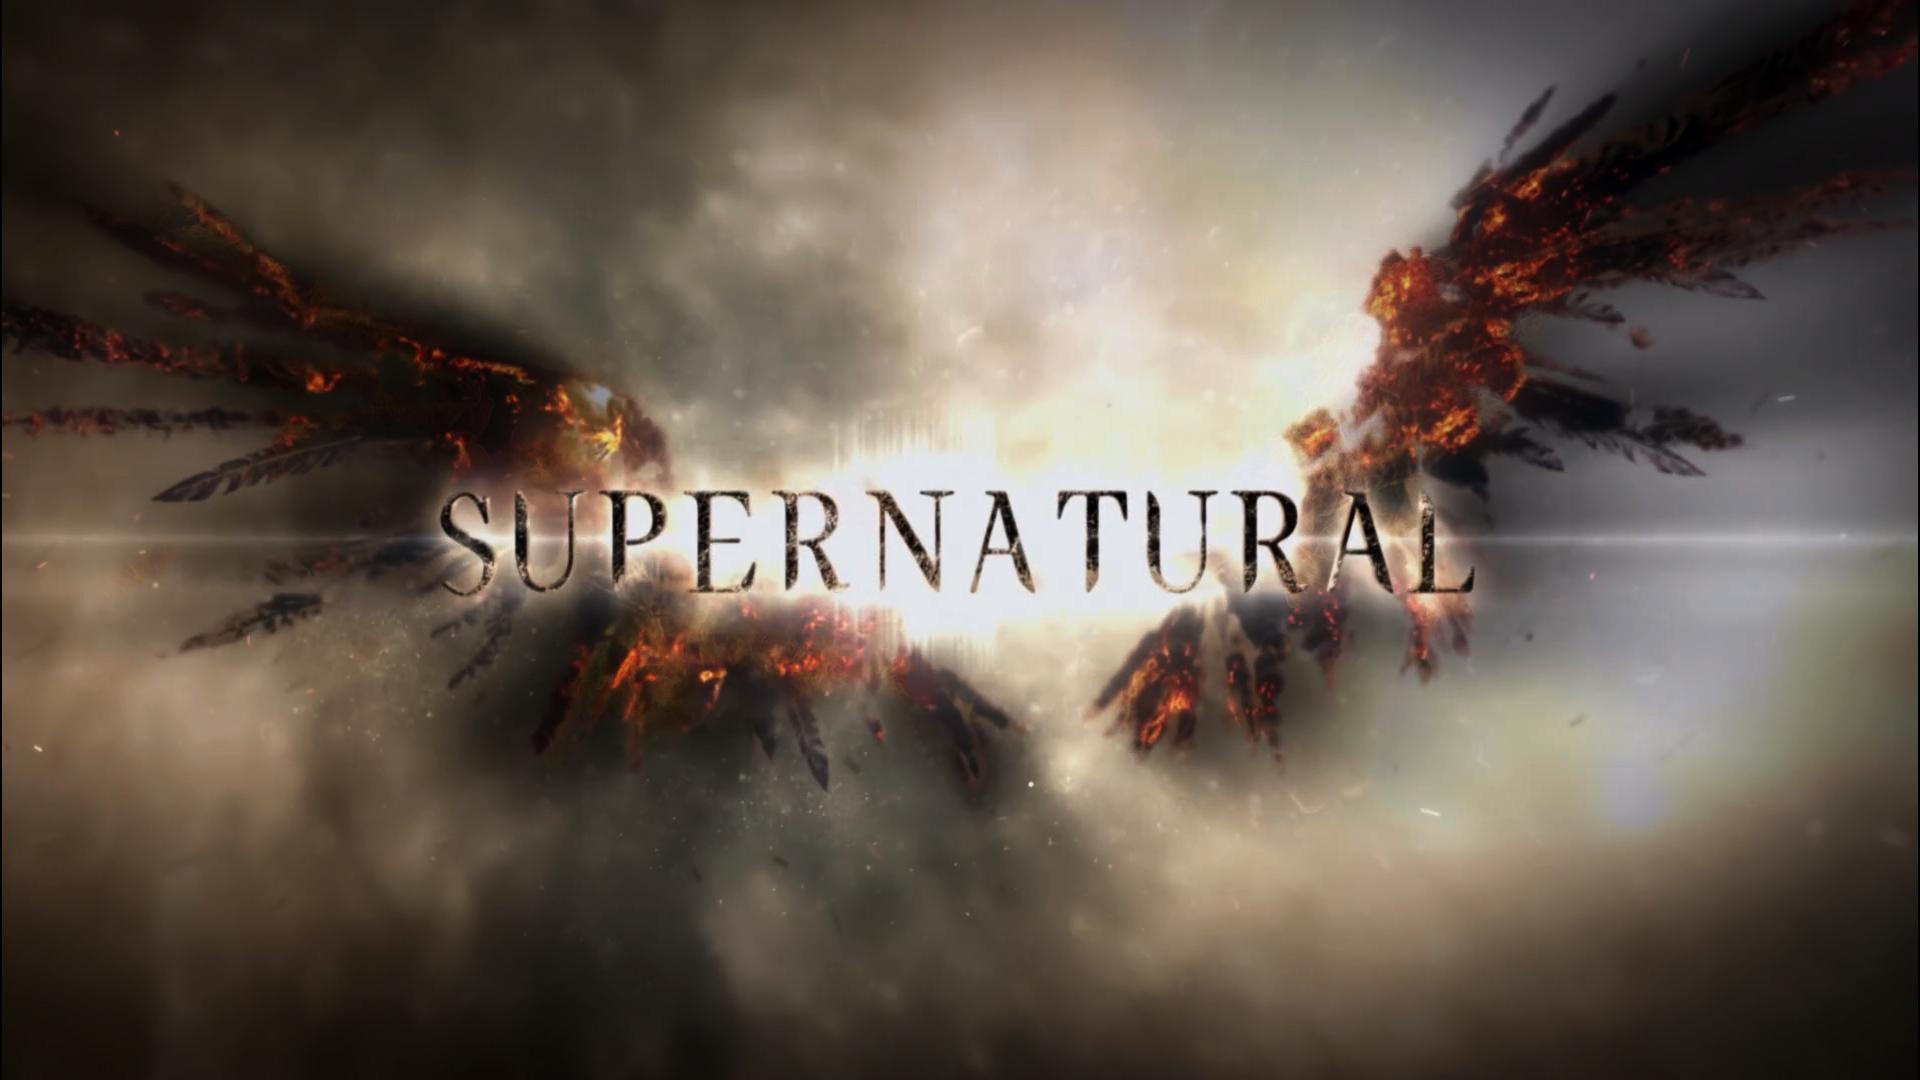 I &;&;made&;&; The supernatural intro into a Wallpaper: 1920x1080